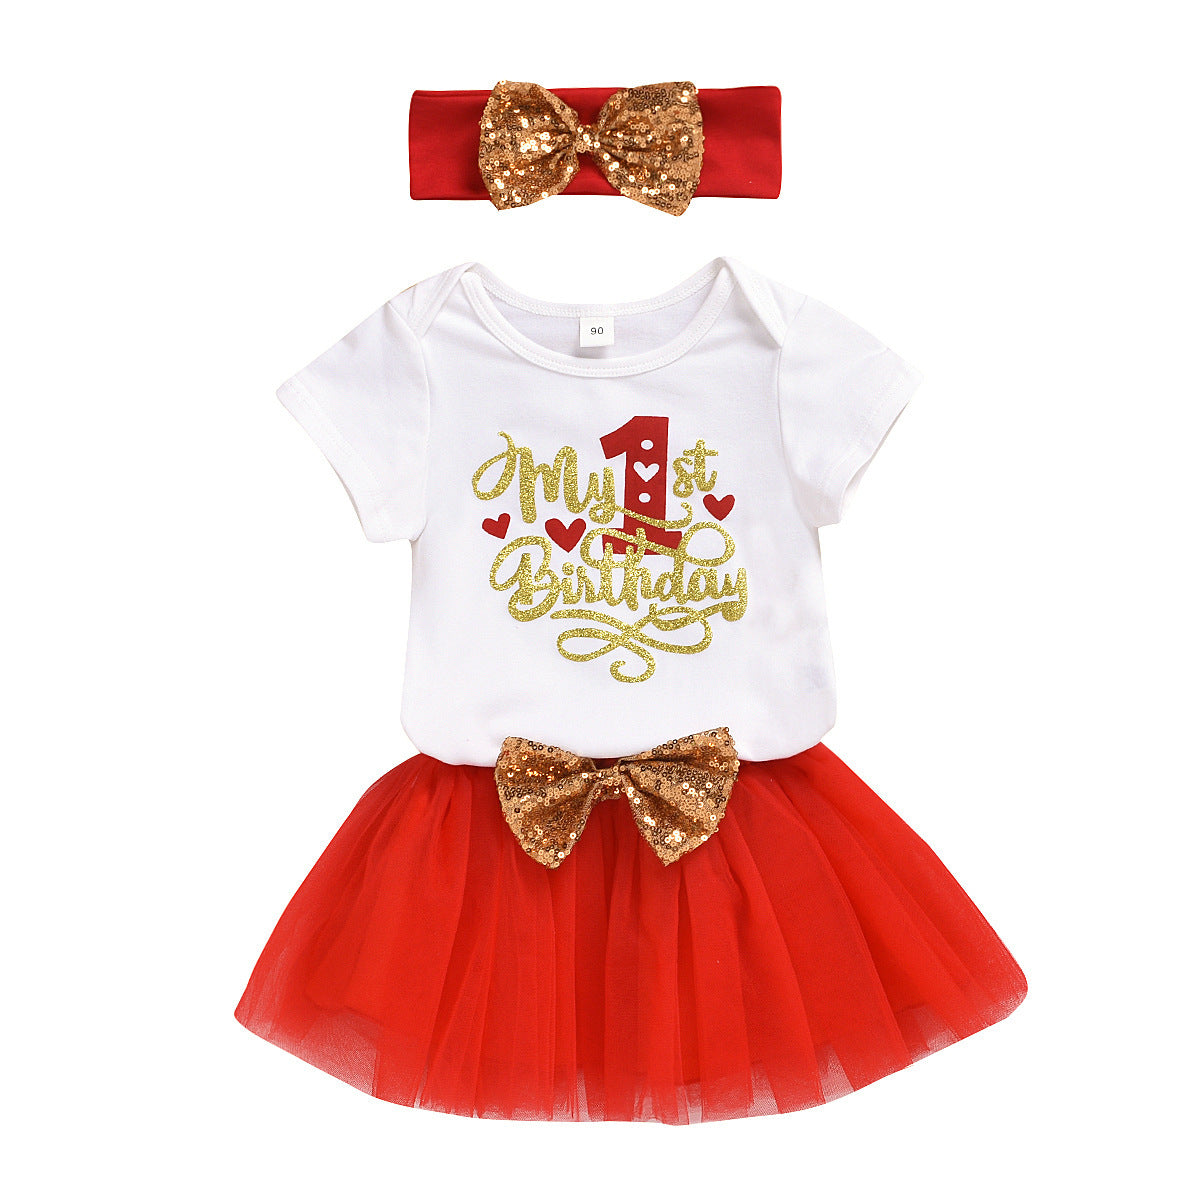 1~3Y Children's Clothing Summer Girl Suit 1st Birthday Party Dress Gift Box Romper Mesh Princess Dress Three-Piece Set Wholesale Kids Clothing